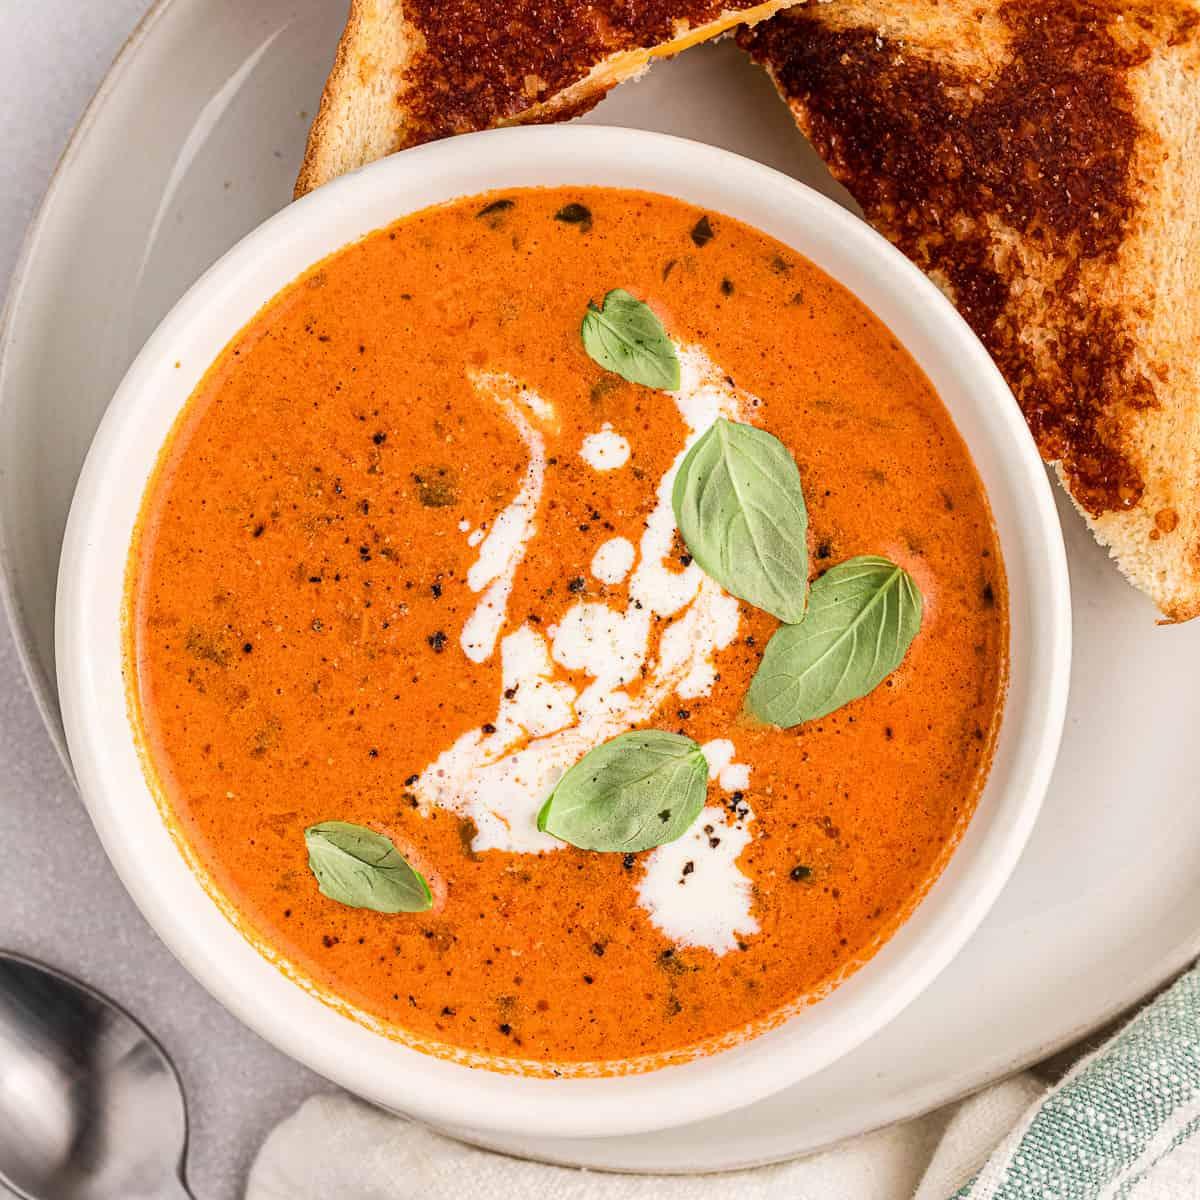 https://selfproclaimedfoodie.com/wp-content/uploads/tomato-soup-from-pasta-sauce-featured.jpg